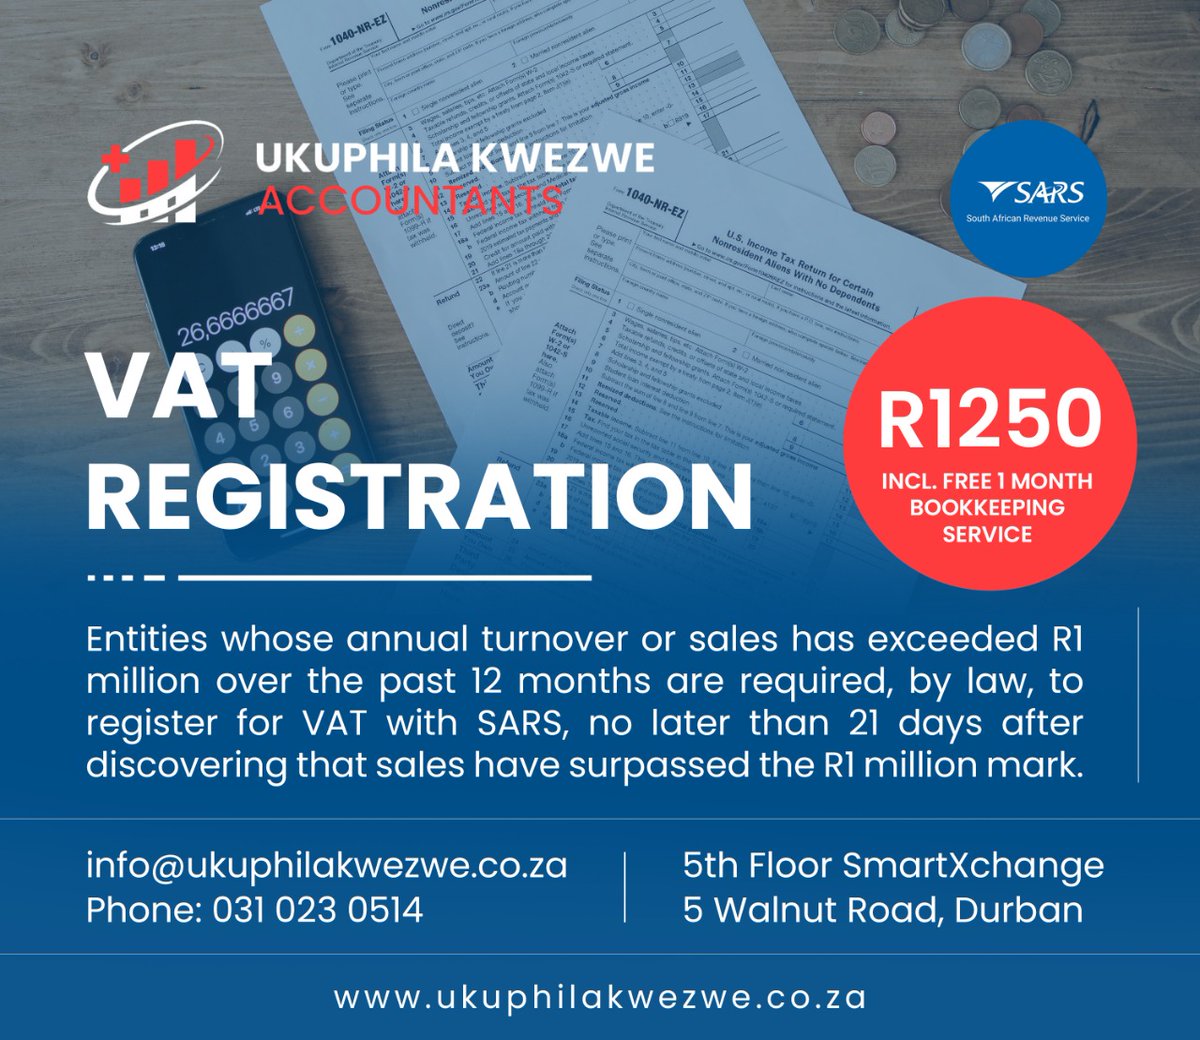 VAT REGISTRATION

Entities whose annual turnover or sales has exceeded R1 mil over the past 12 months are required by law to register for VAT with SARS, no later than 21 days after discovering that sales have surpassed the R1 mil mark.

#KONKALIVE / ngizwe / Oscar mbo